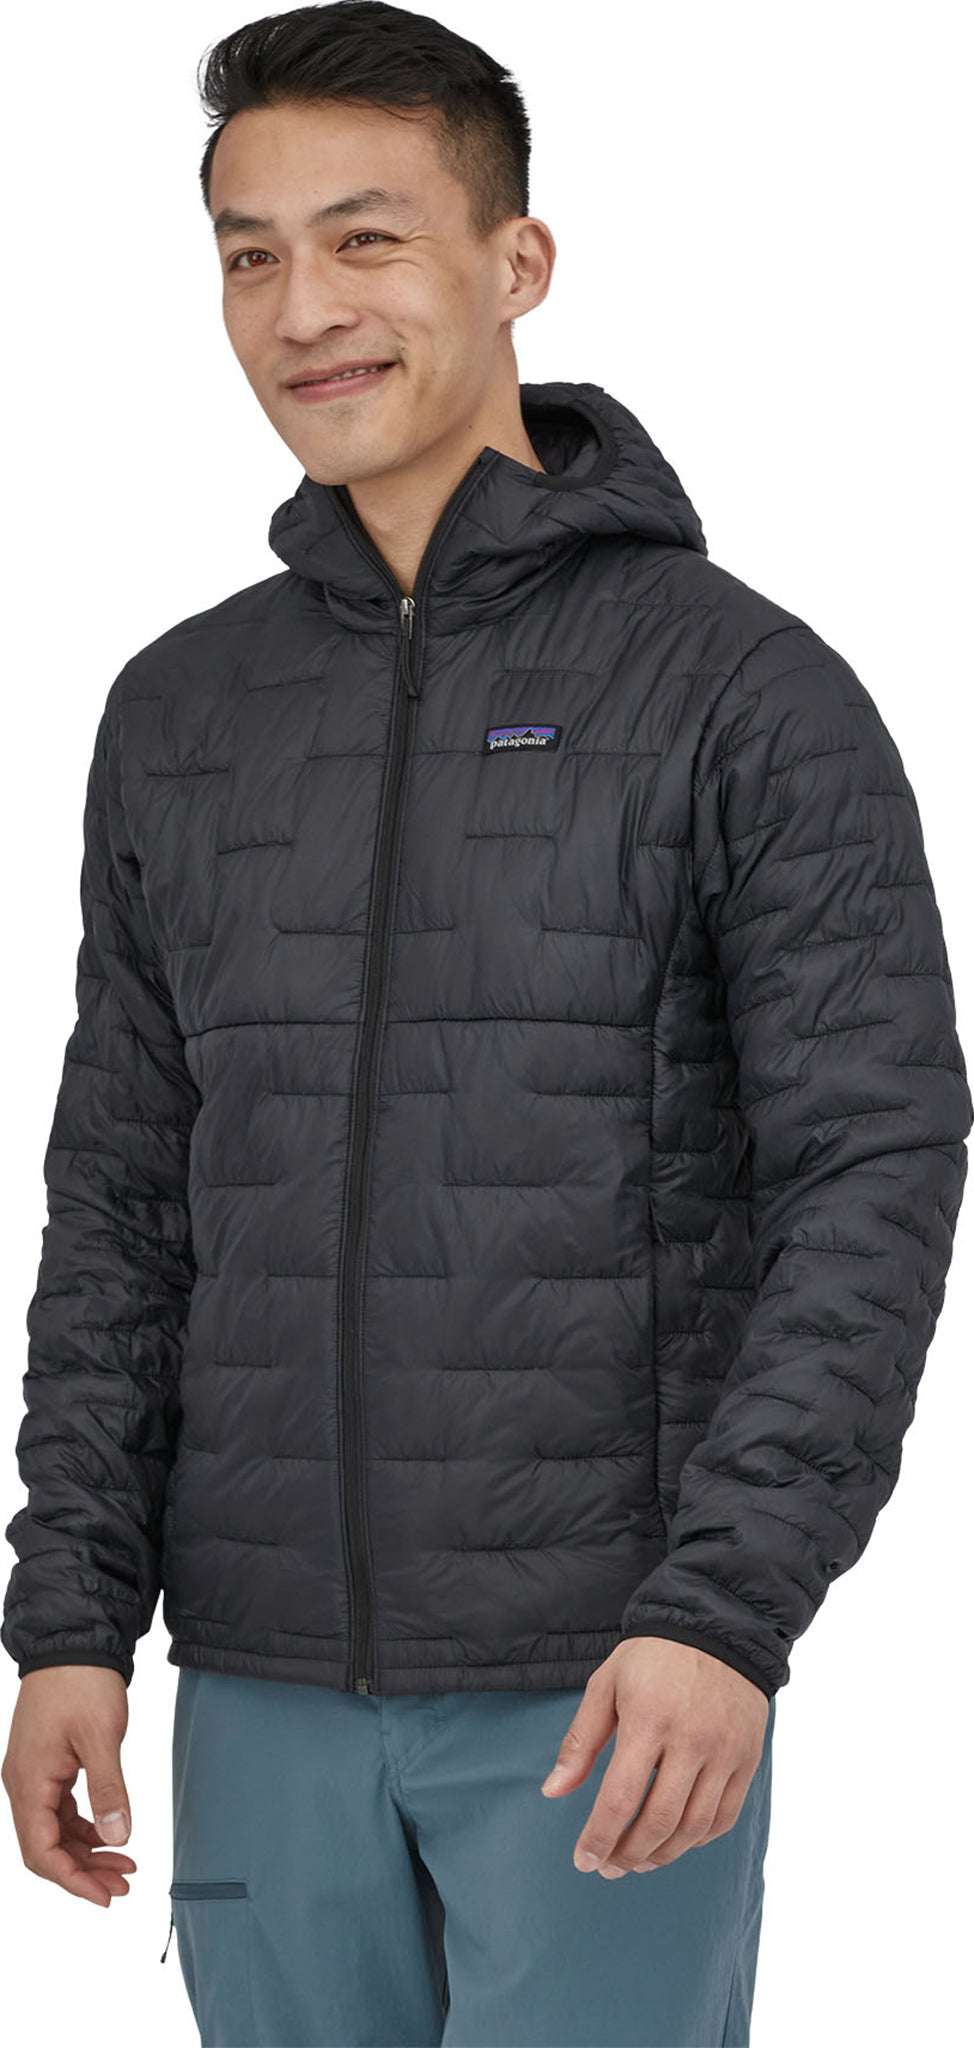 Micro Puff Hoody BLK 2XL by Patagonia